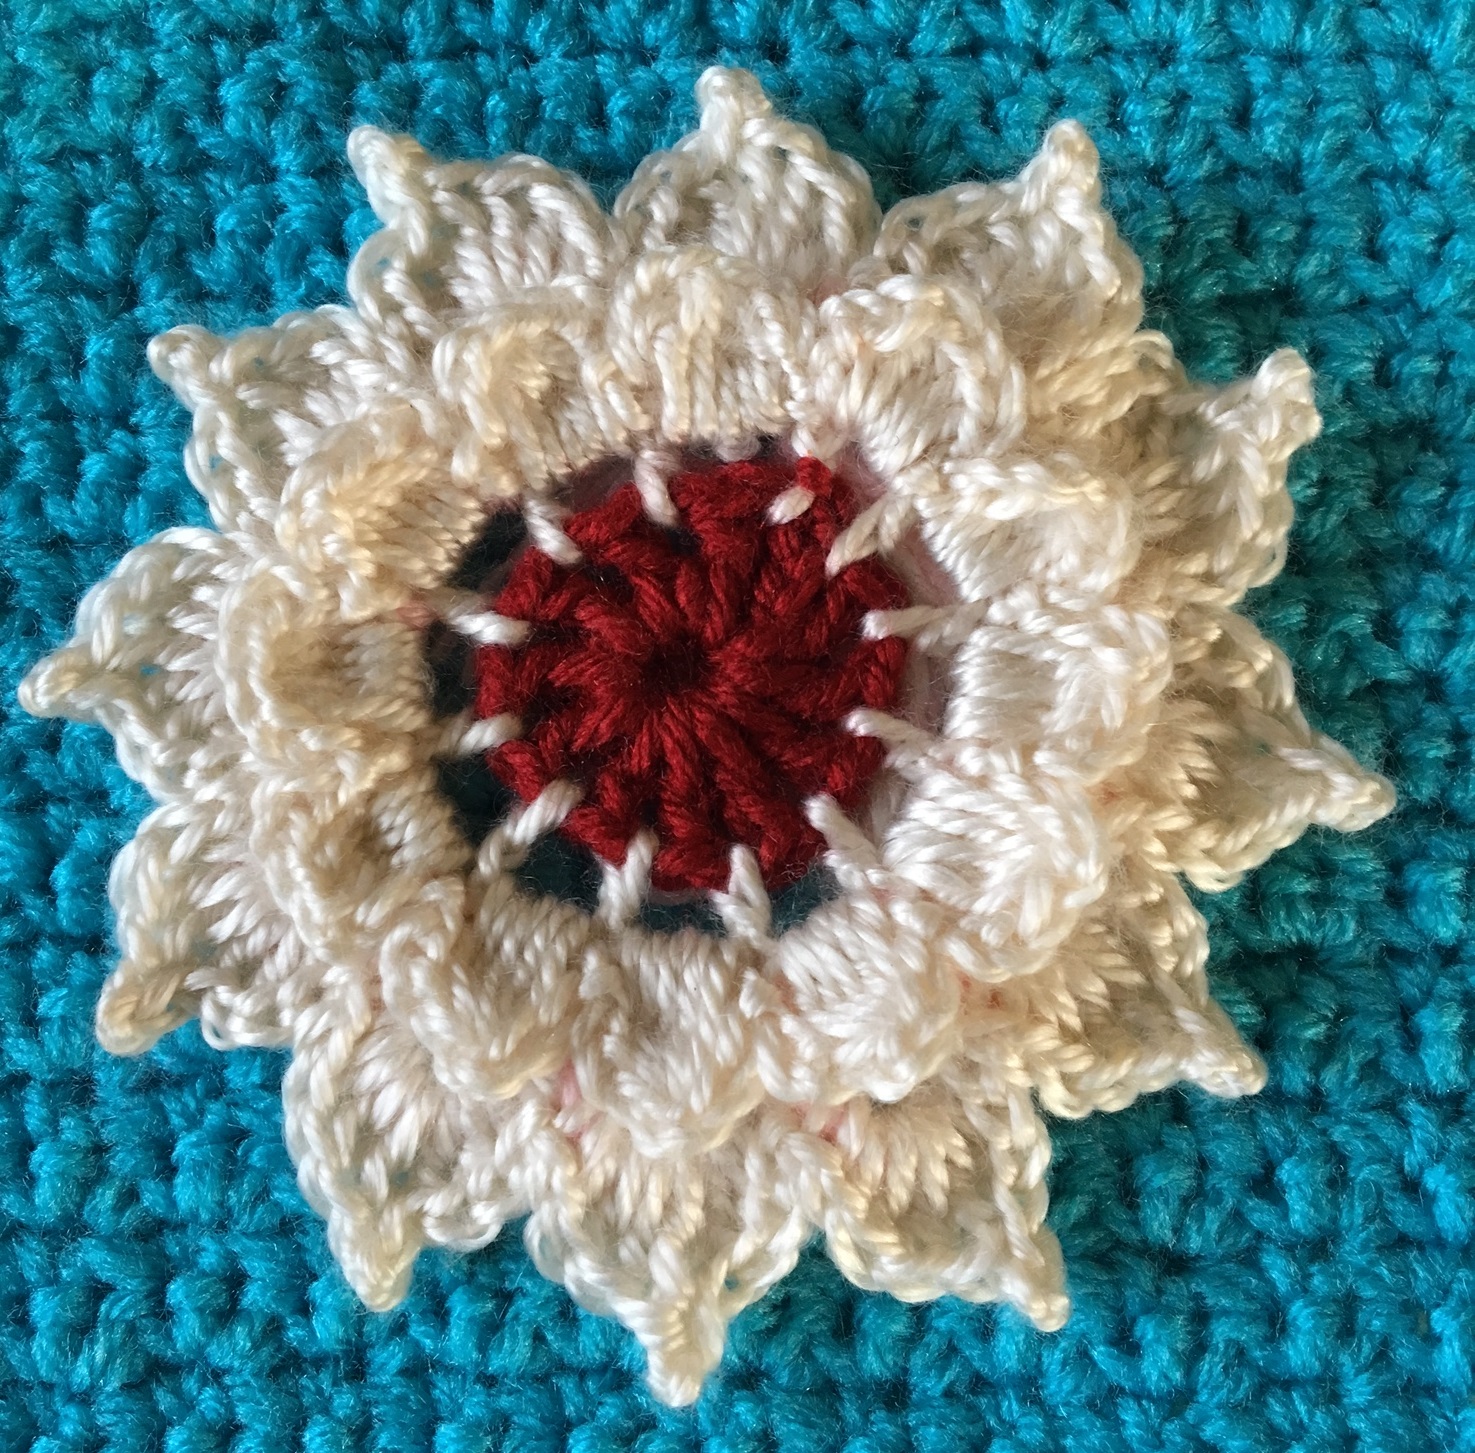 Two-layered crochet flowers